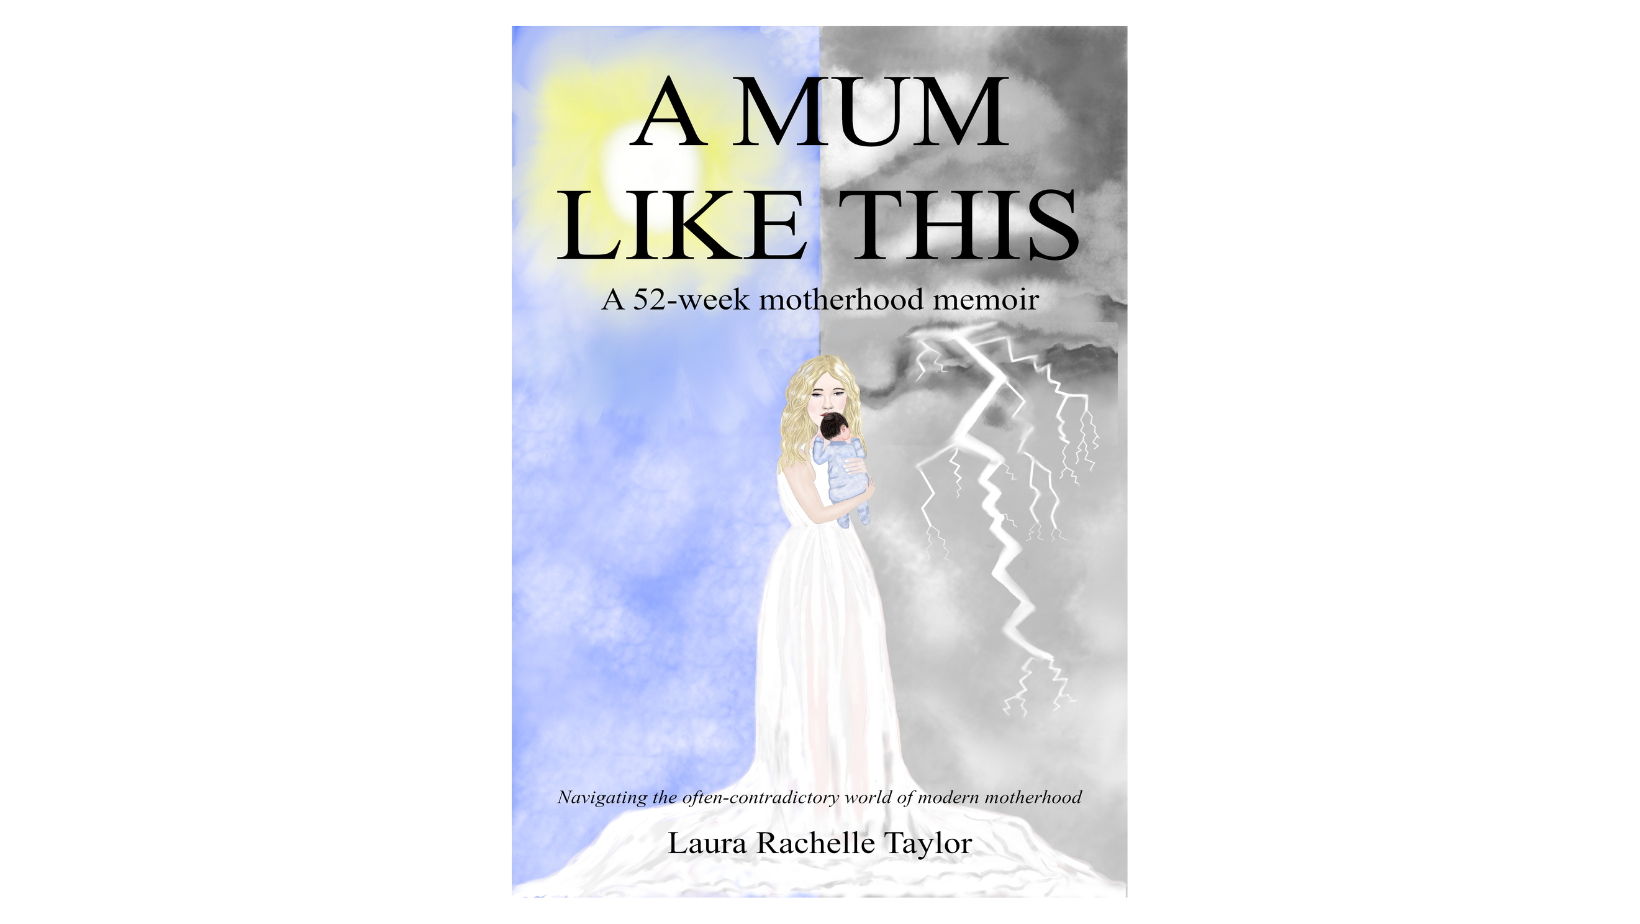 Revealing Motherhood’s Truths: Award-Winning Writer Laura Rachelle Taylor Explores PMDD and Unspoken Challenges in ‘A Mum Like This’